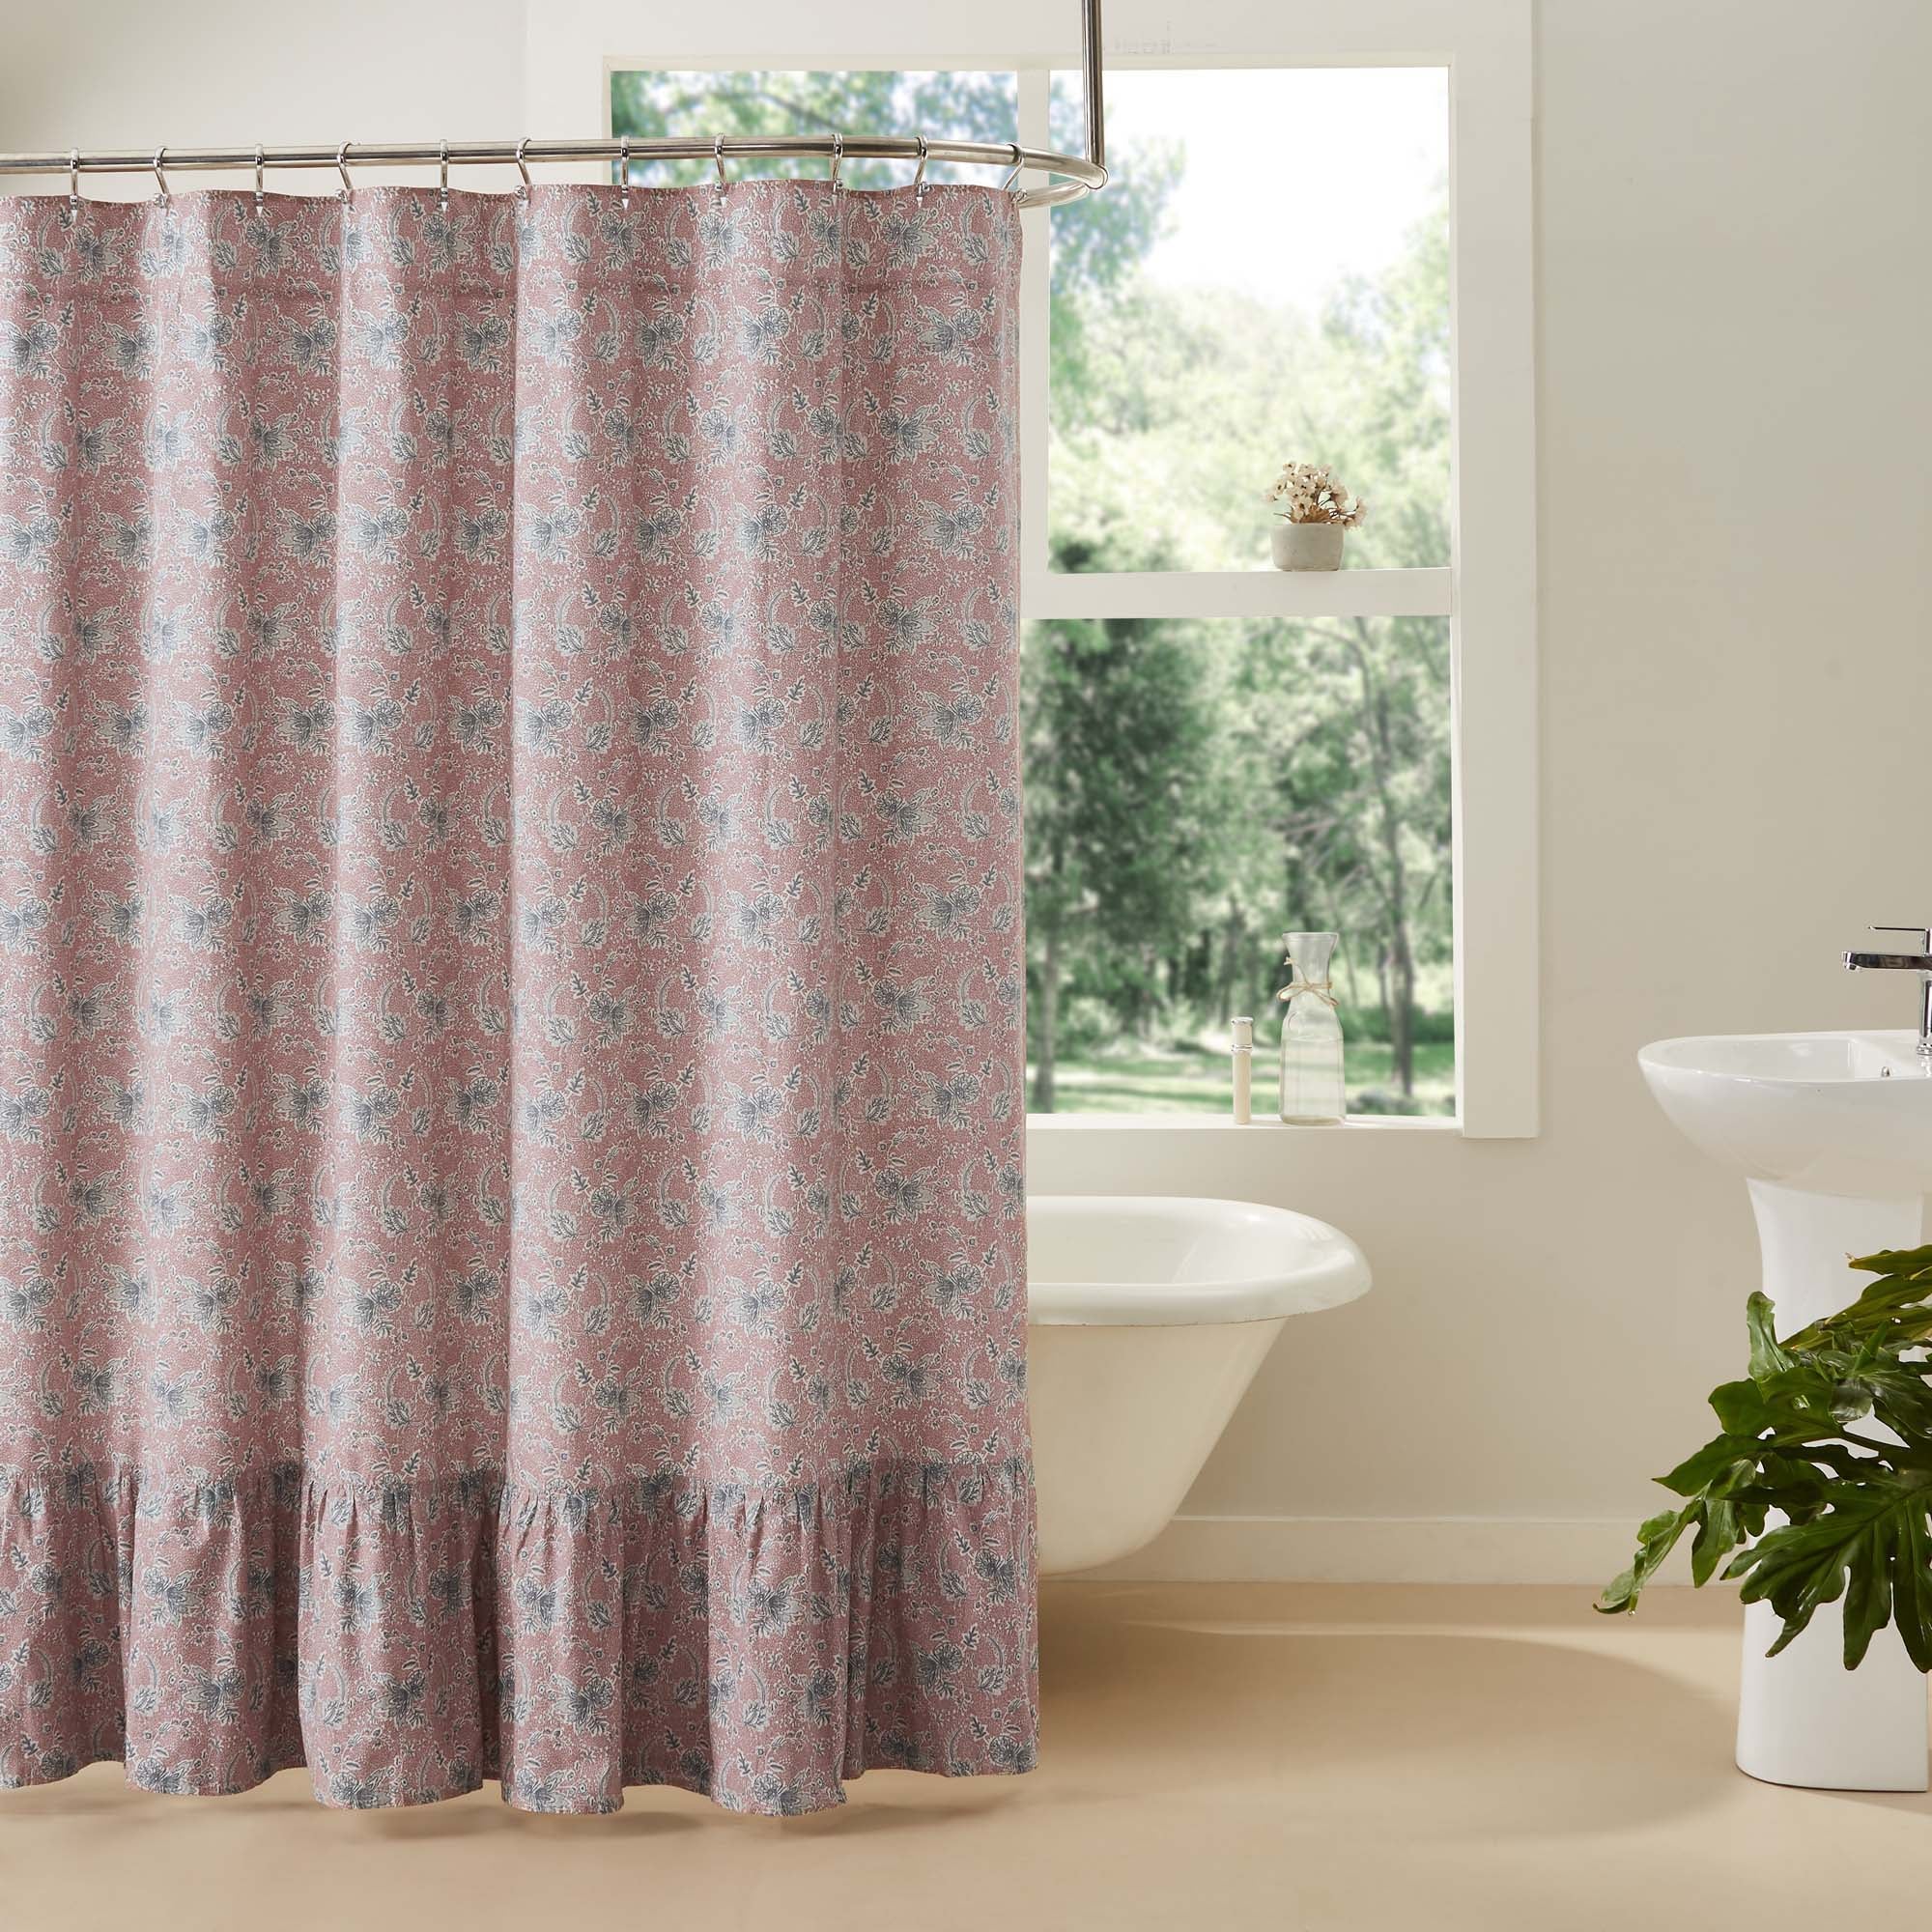 Kaila Floral Ruffled Shower Curtain 72x72 VHC Brands